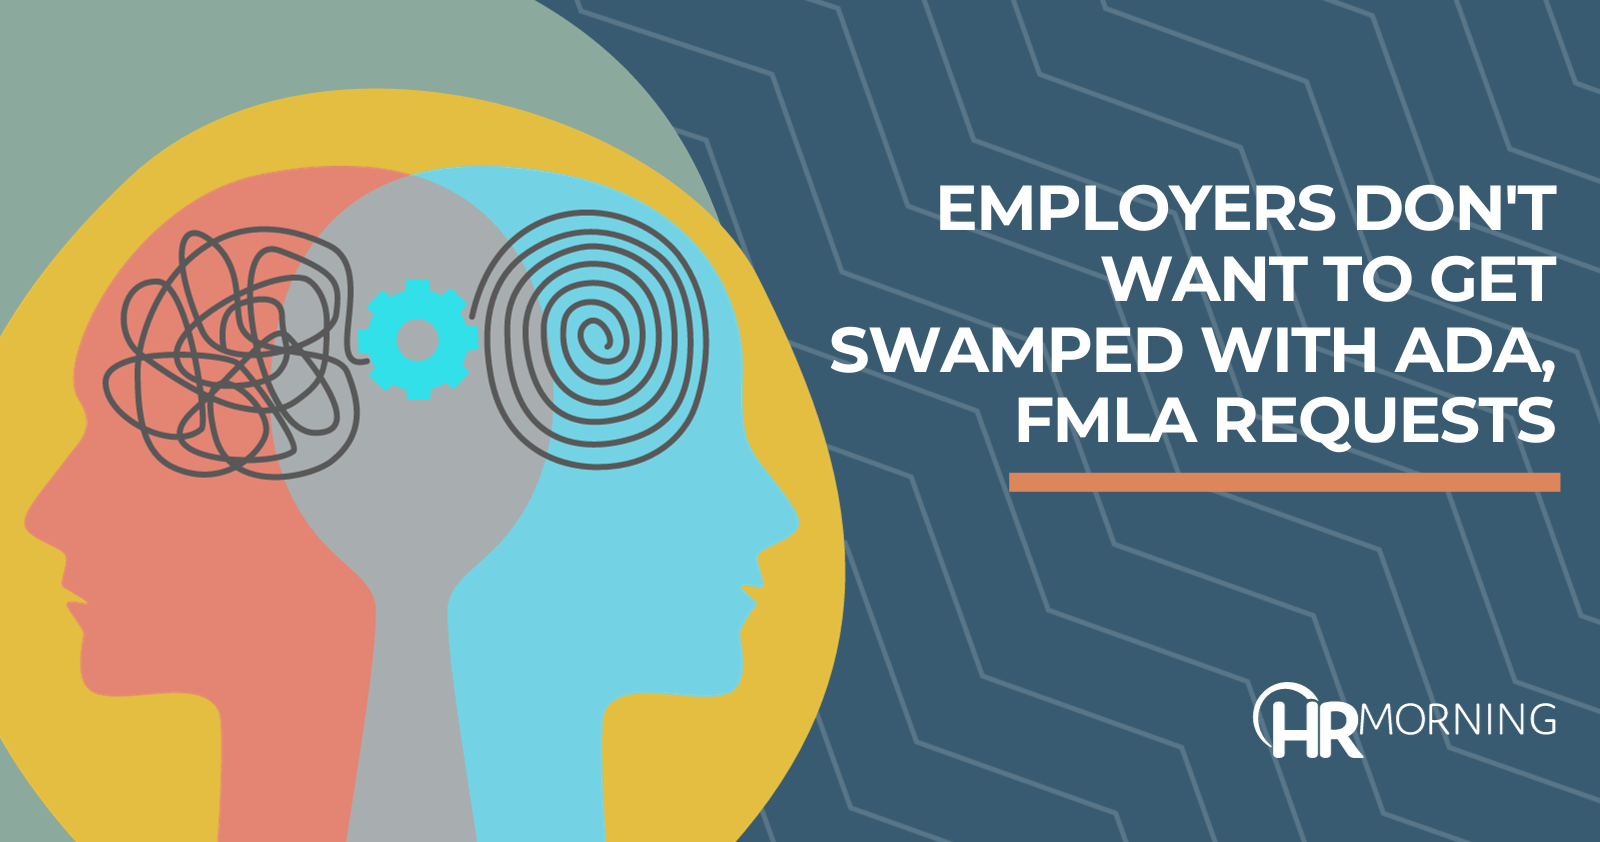 Employers don't want to get swamped with ADA, FMLA requests